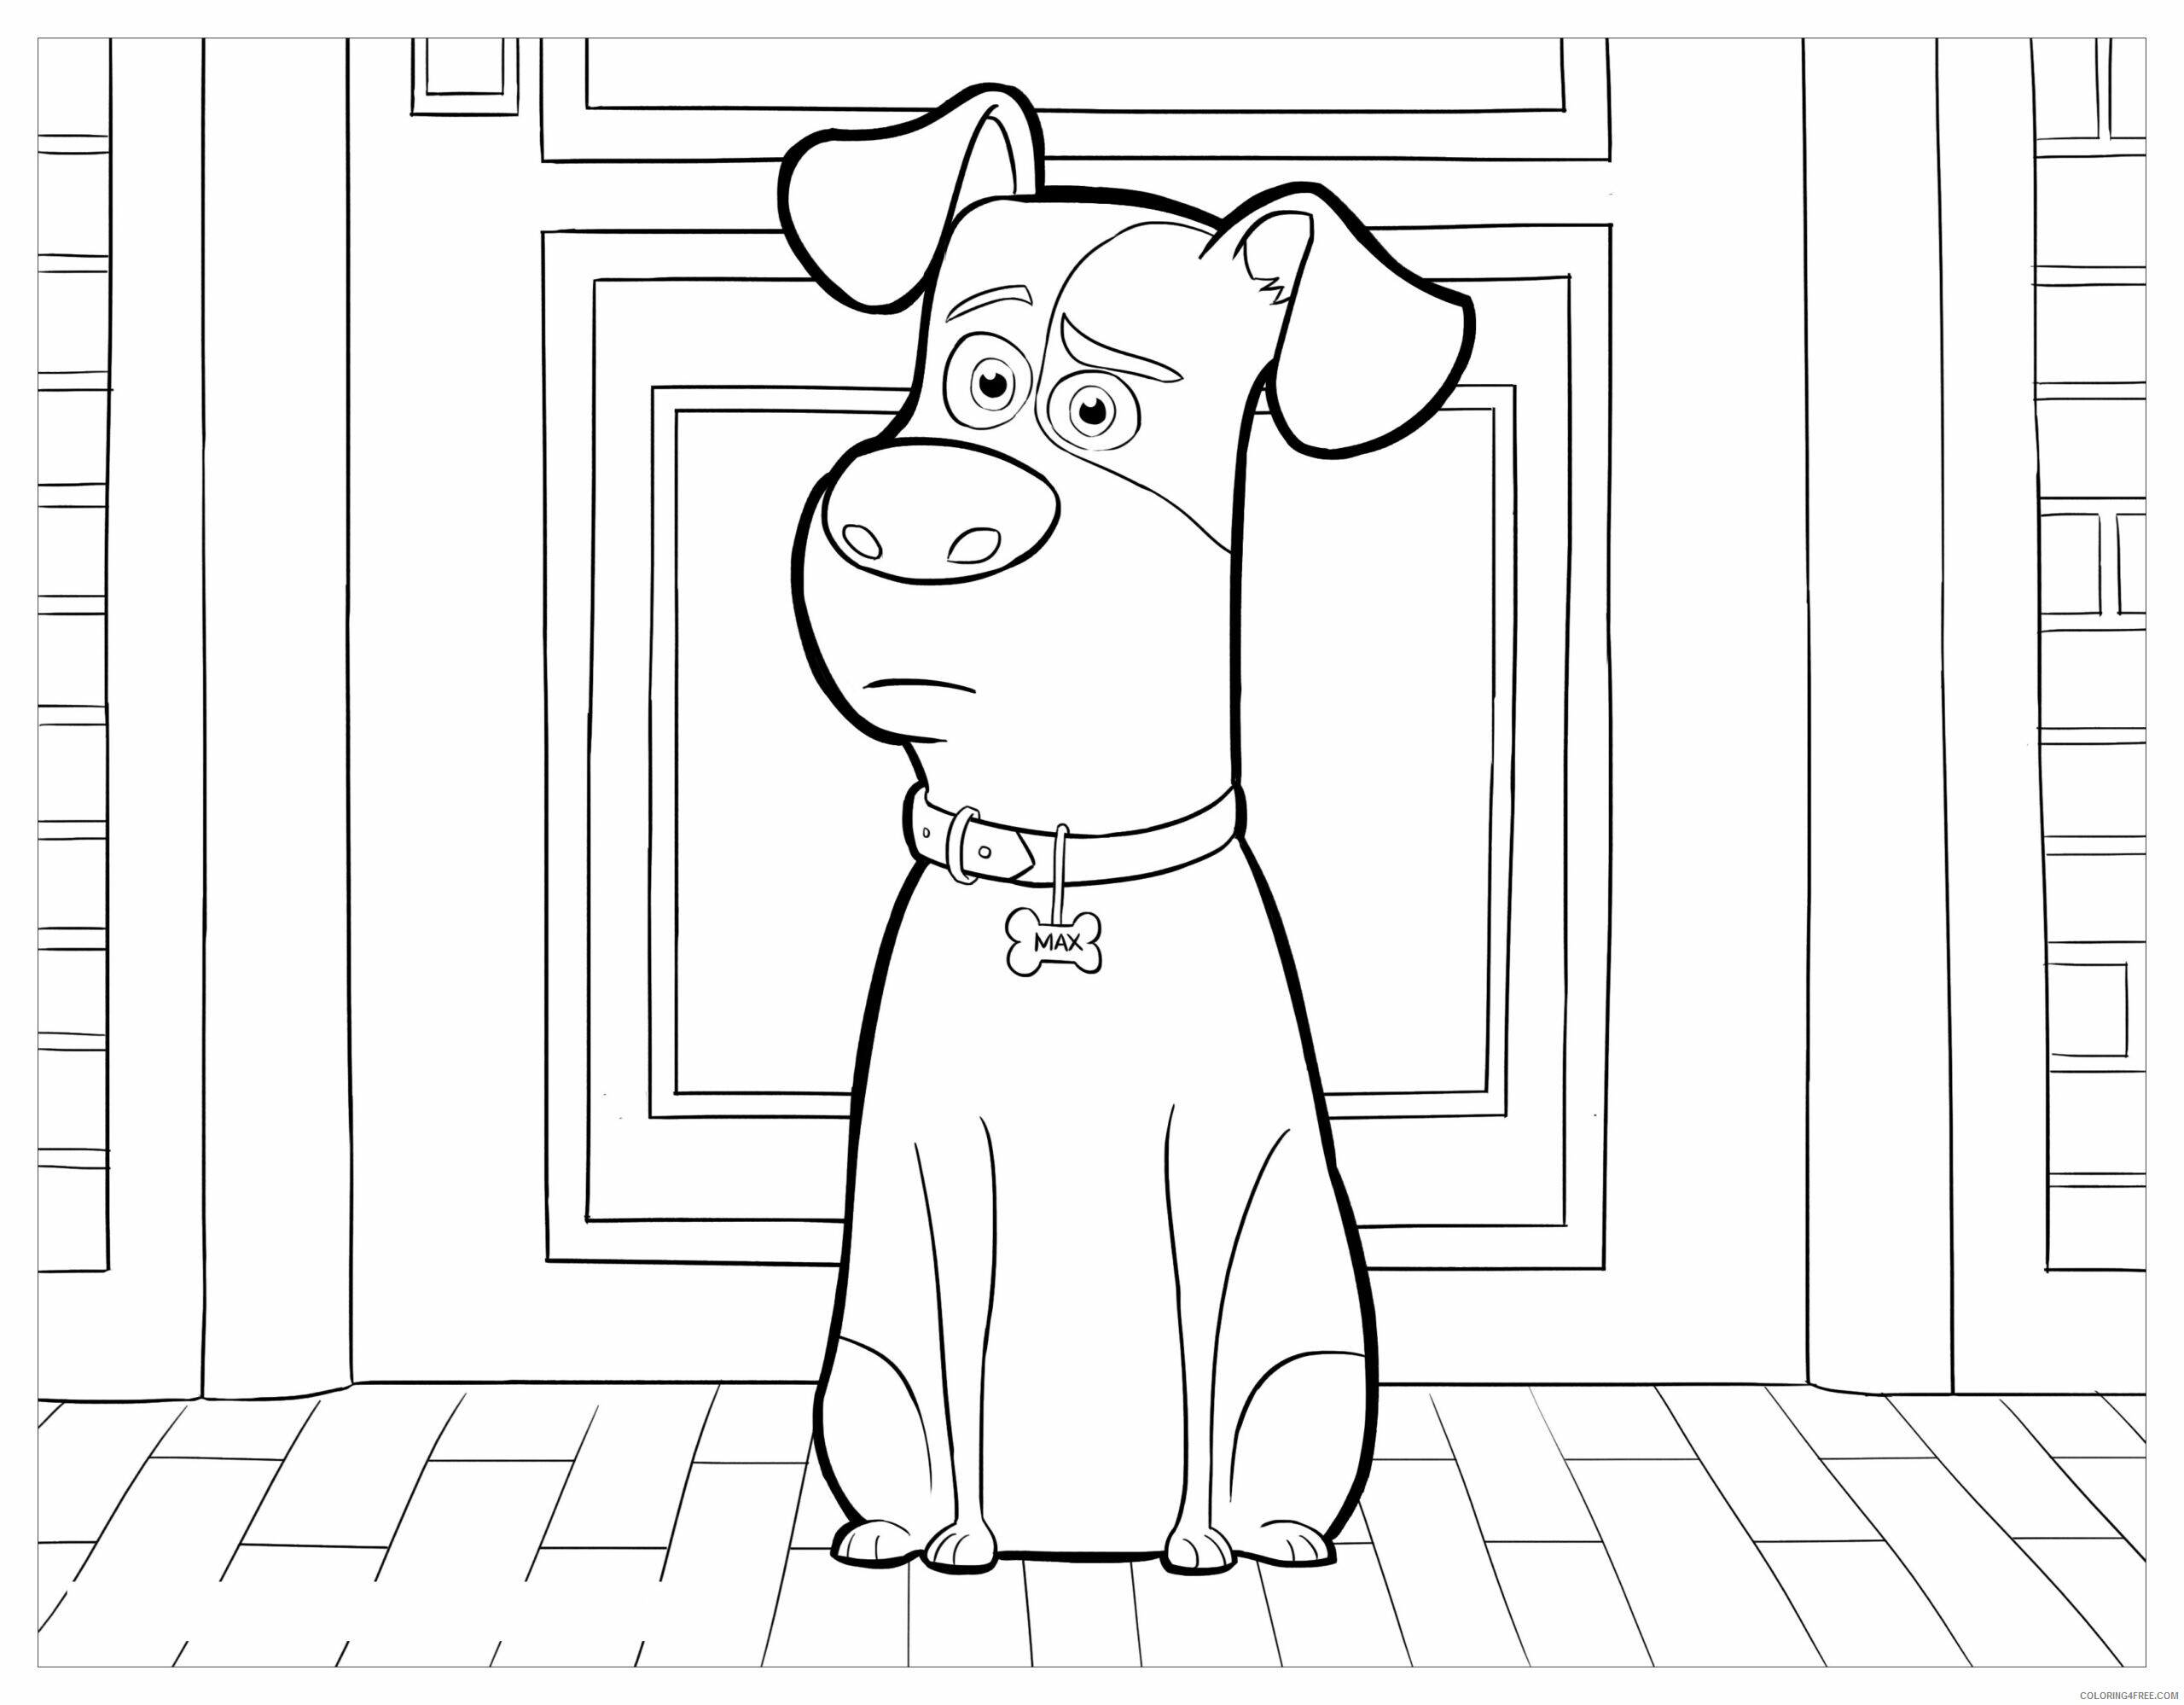 The Secret Life of Pets Coloring Pages TV Film Printable 2020 09527 Coloring4free